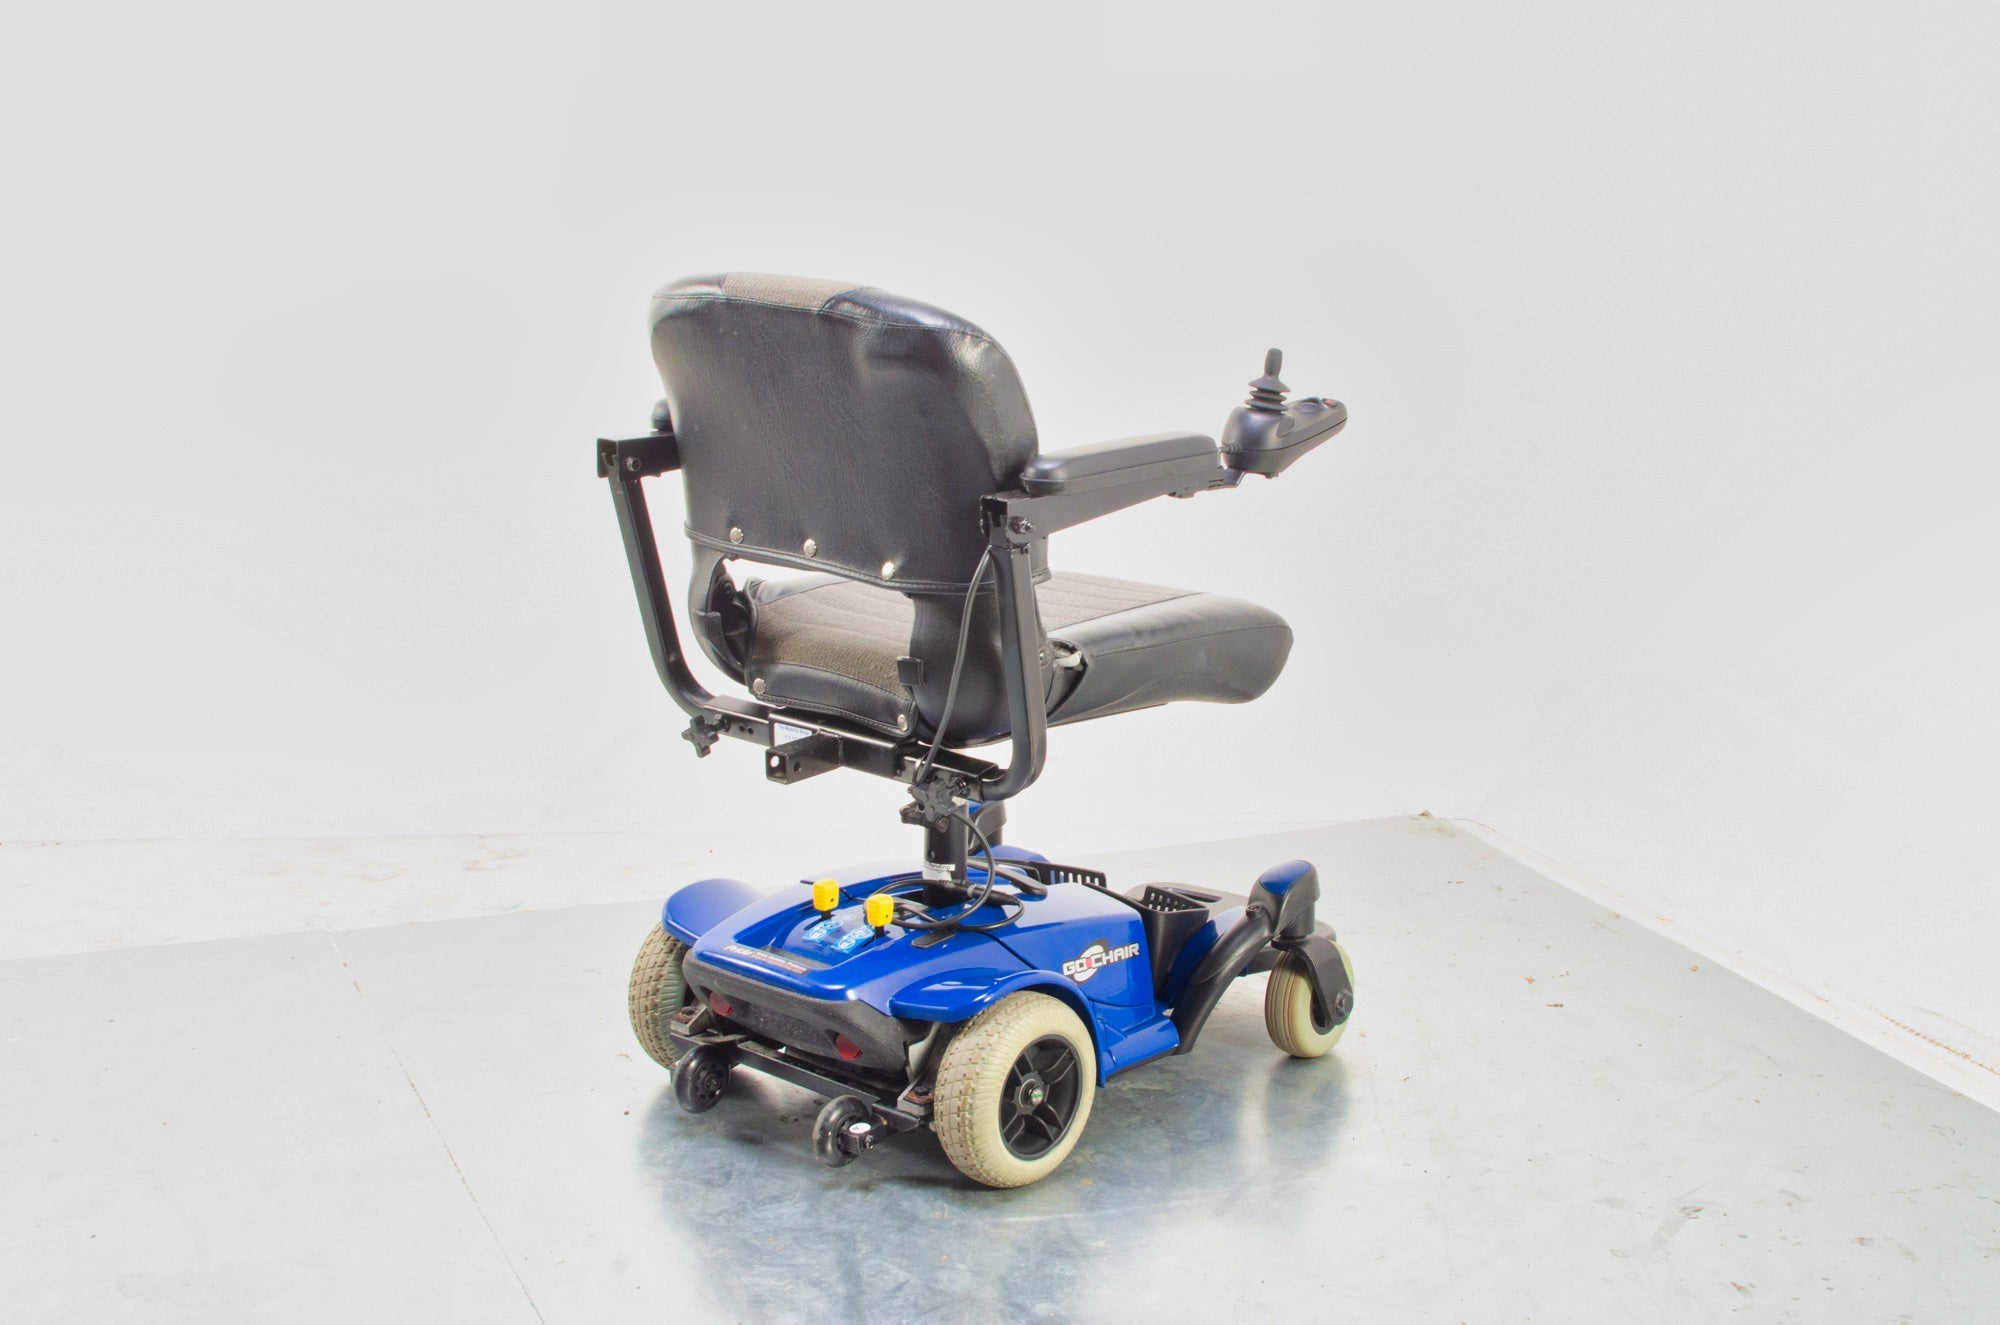 Pride Go Chair Small Compact Indoor Powerchair Electric Wheelchair